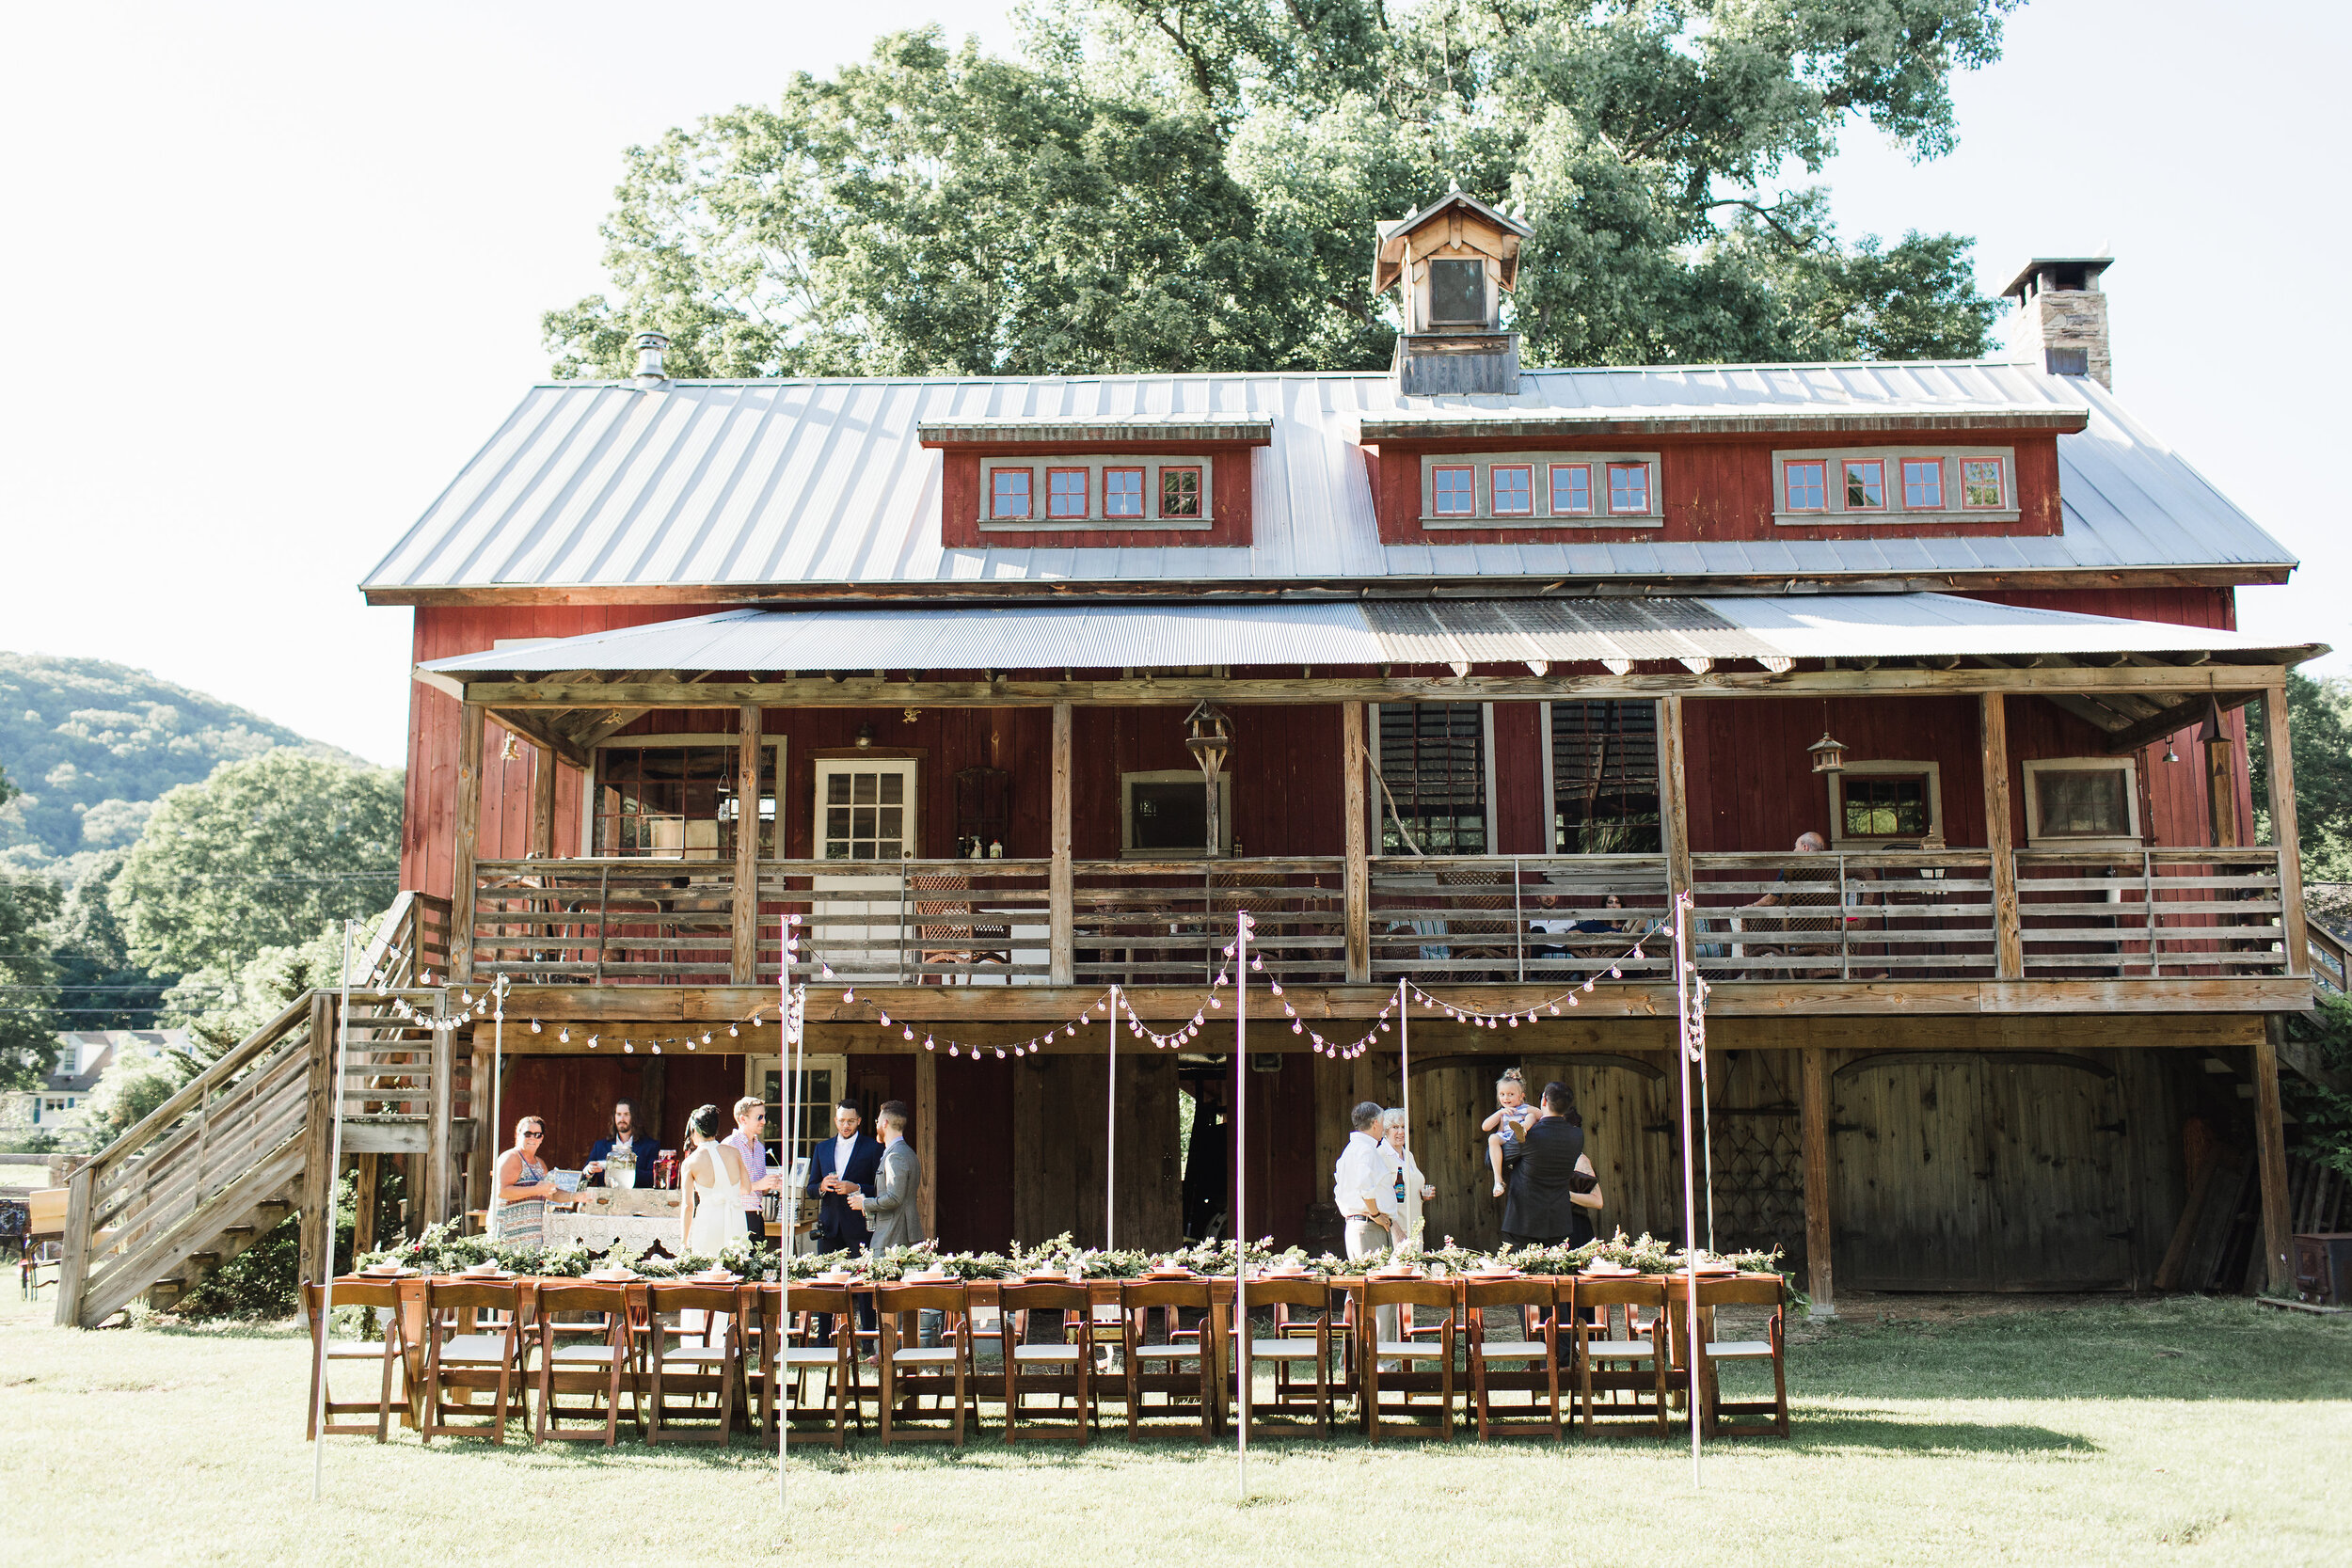 The Spirit Horse Farm Intimate Outdoor Wedding in Kent, CT